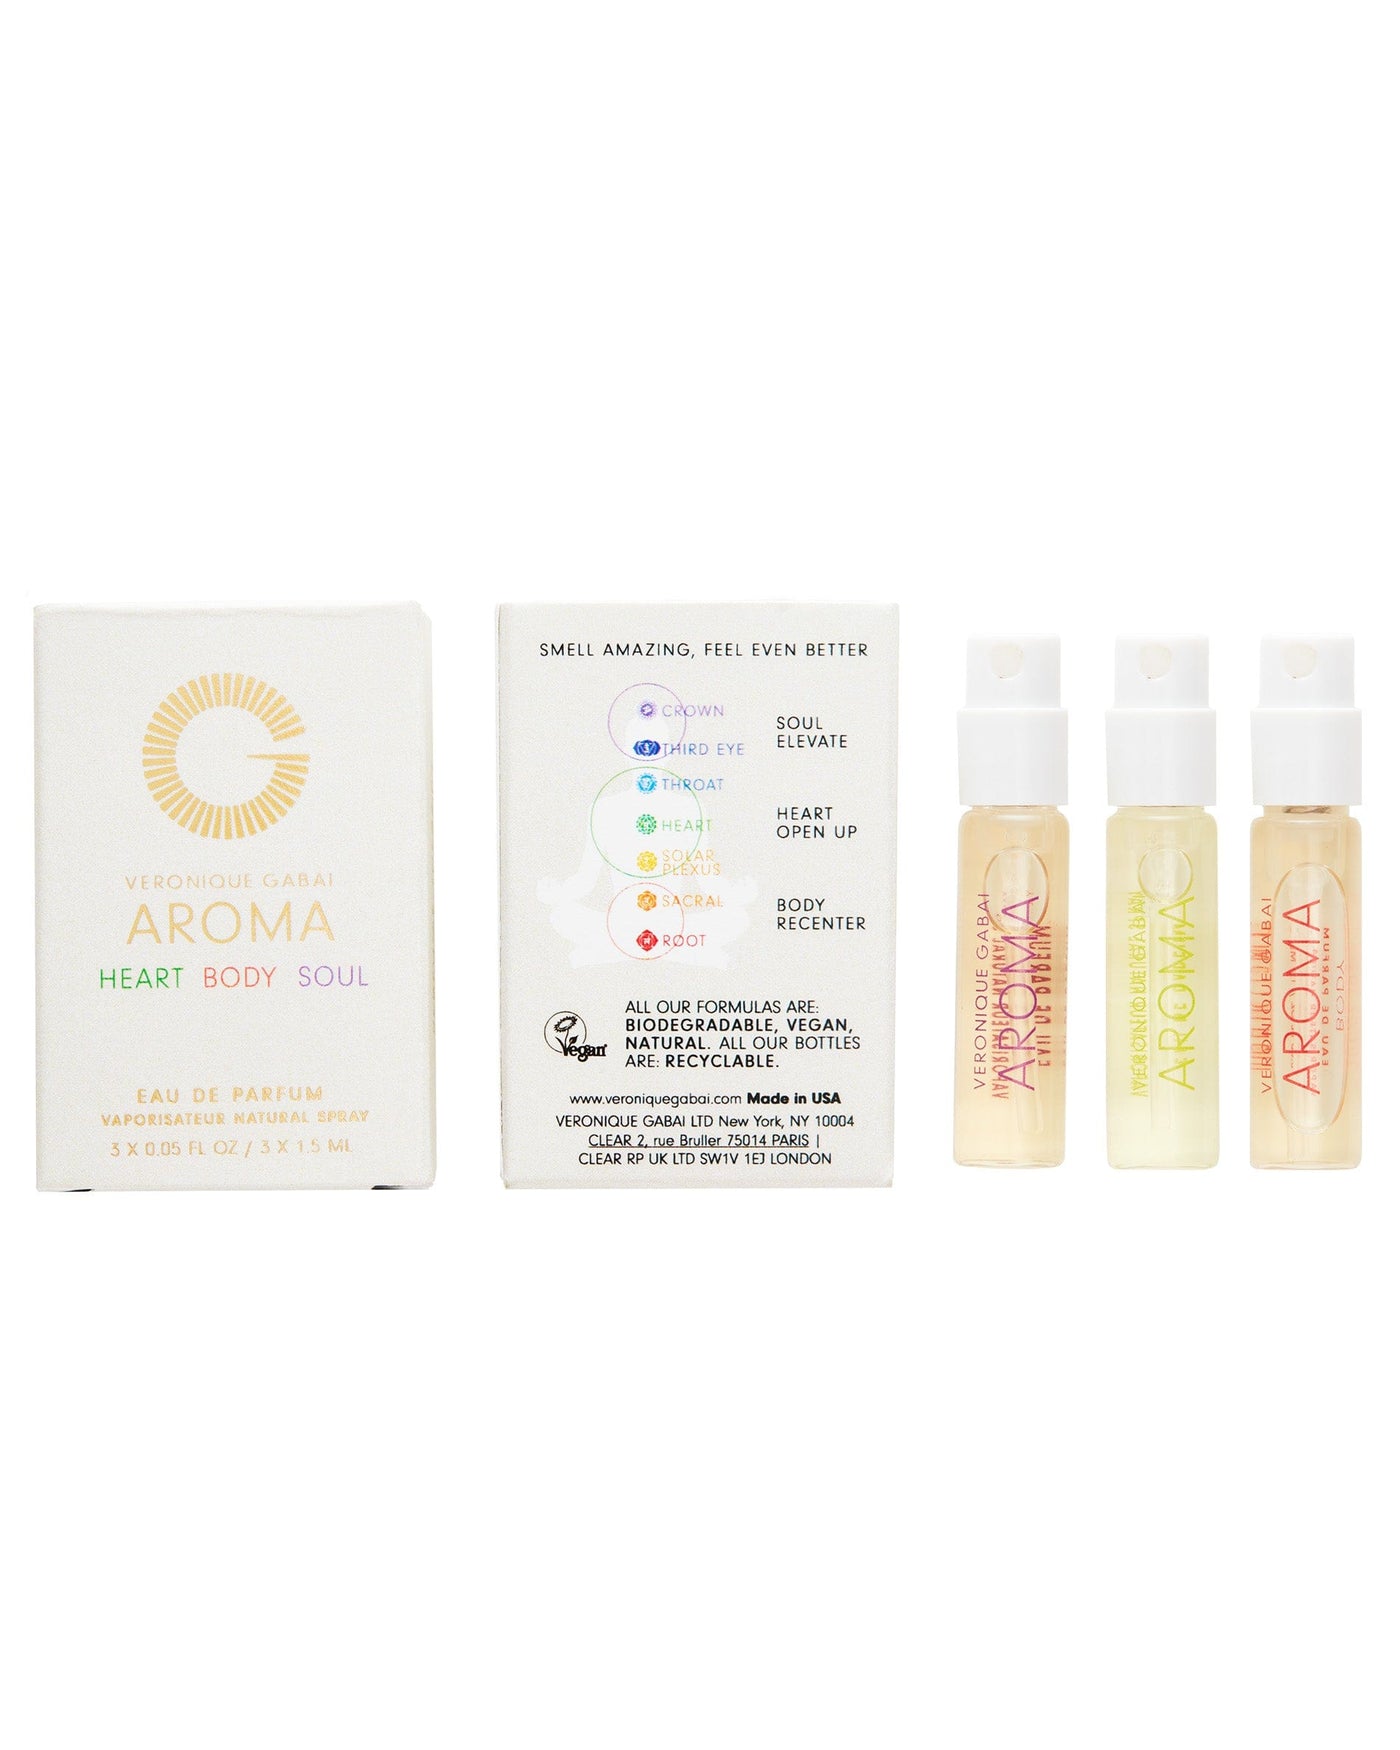 The Aroma Discovery Set - 3 x 1.5ml